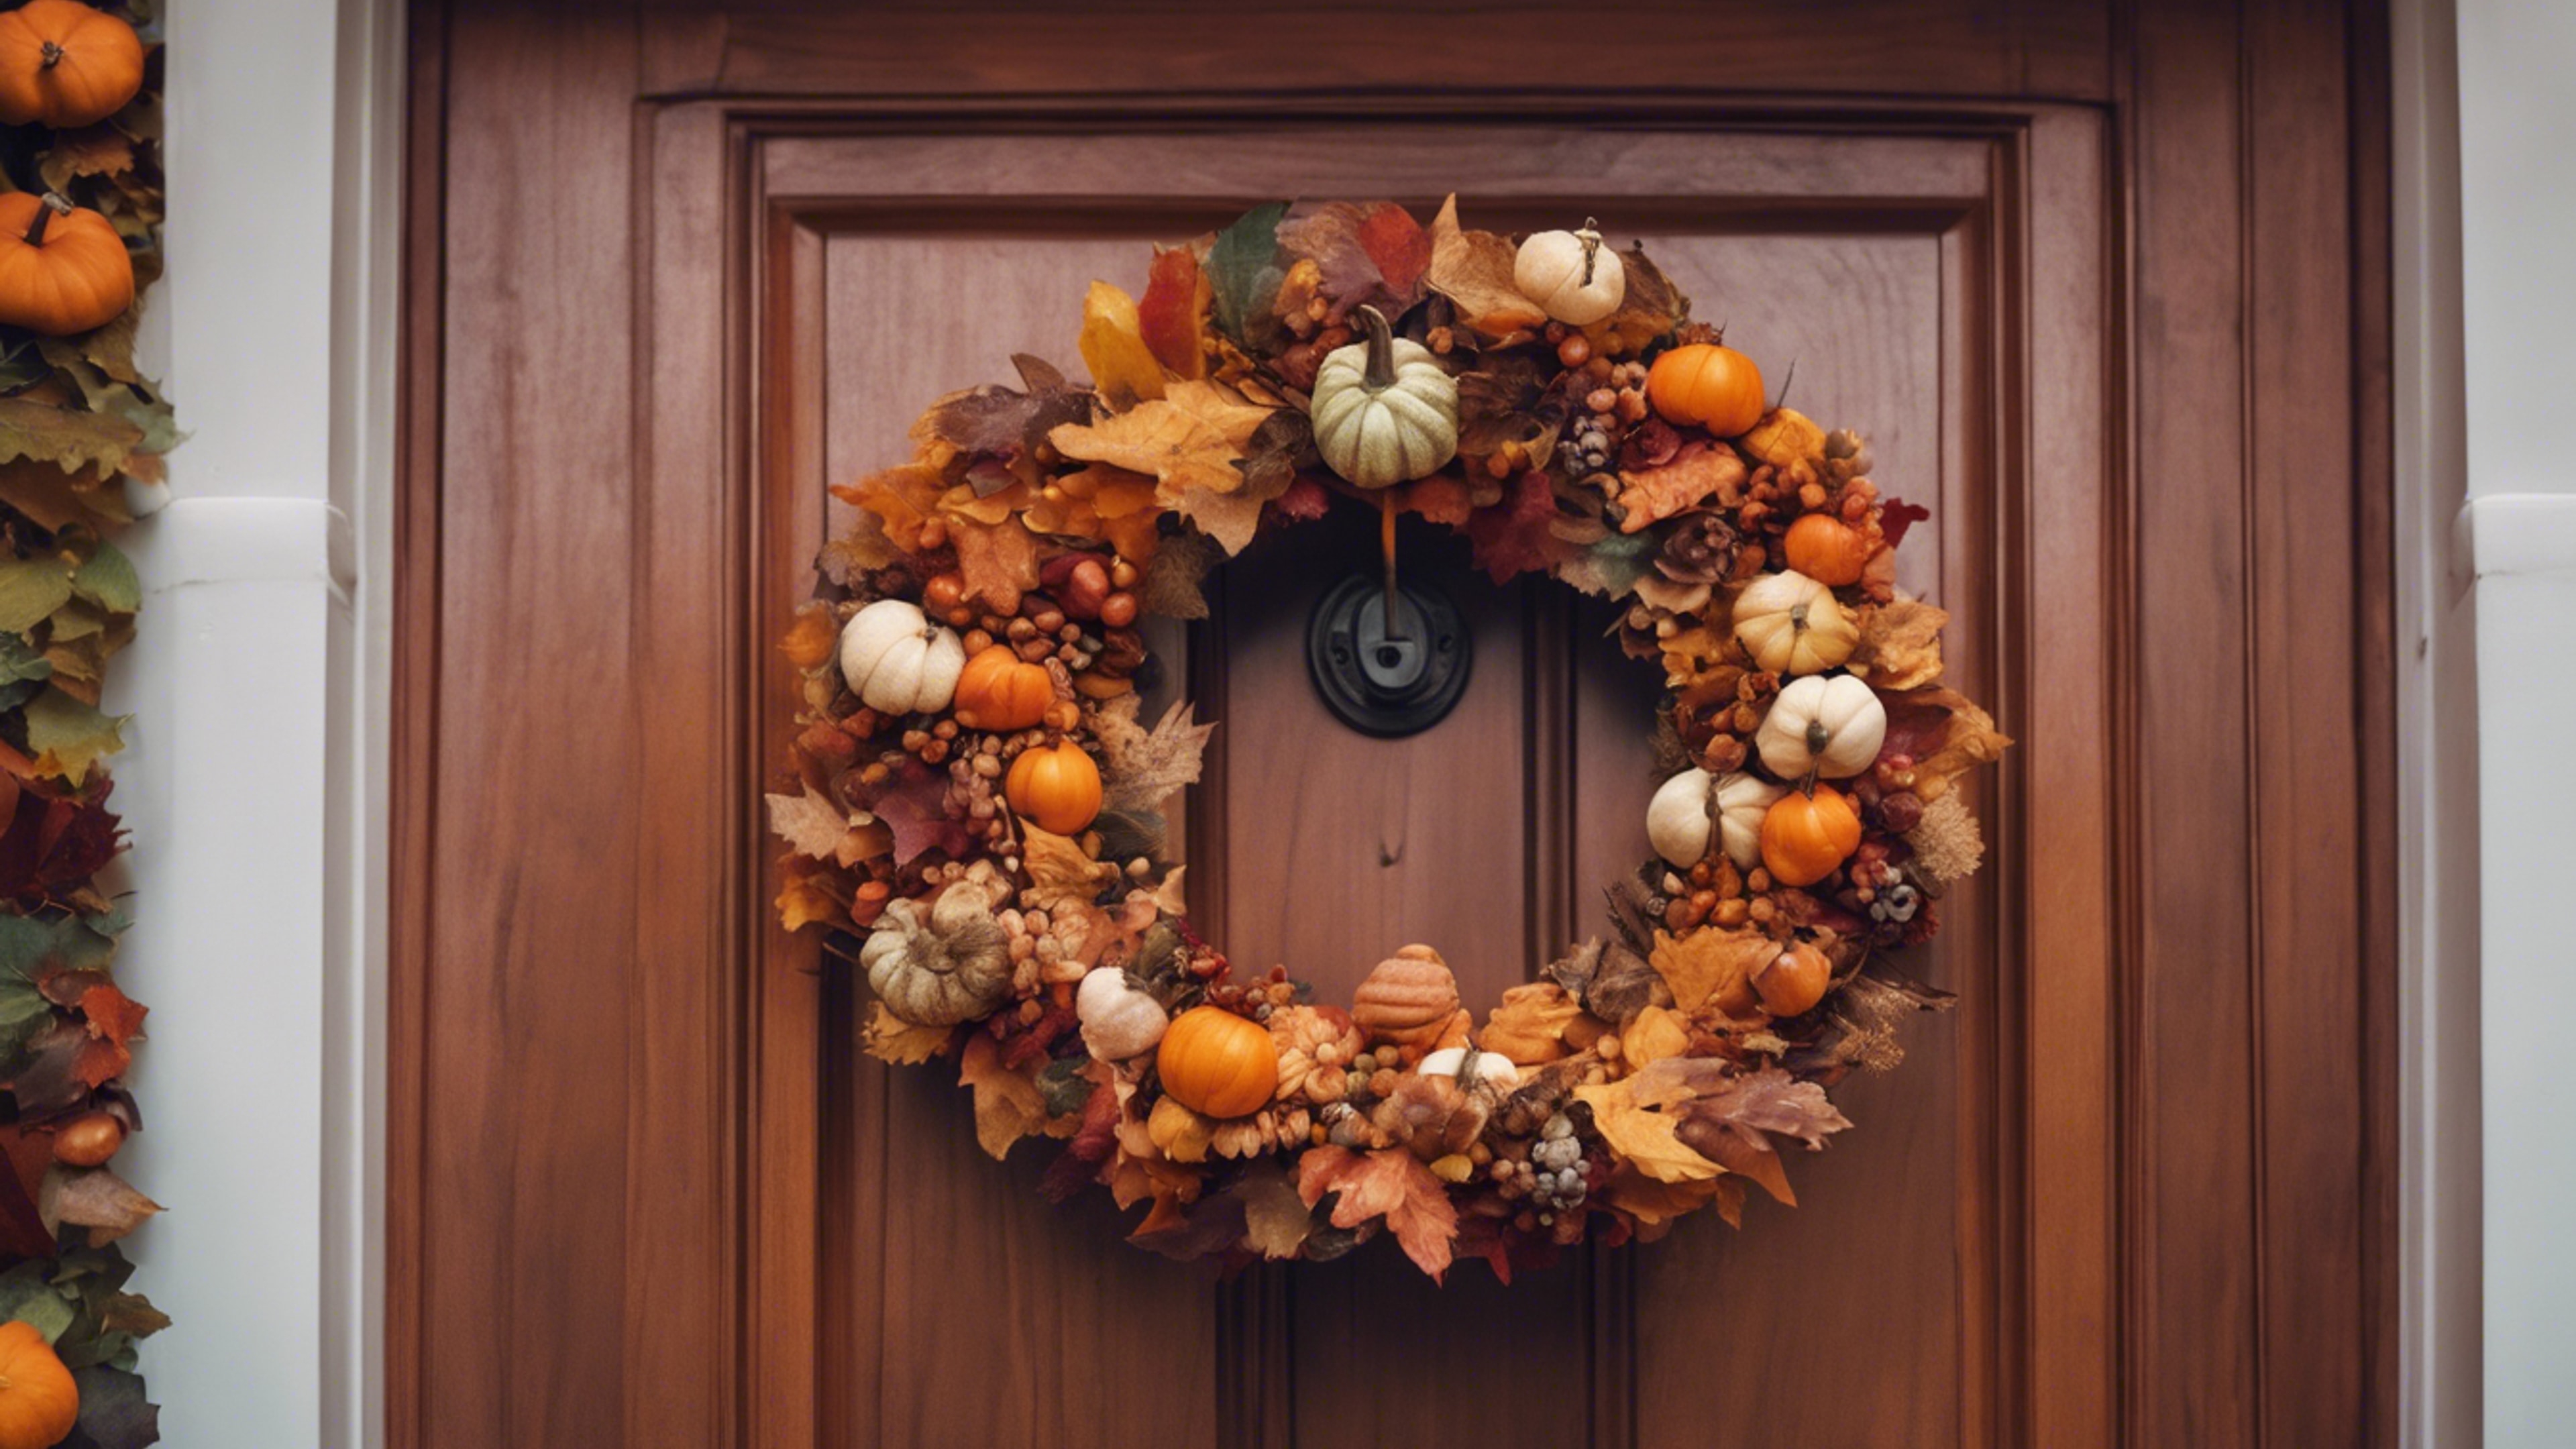 A festive autumn wreath made of colorful fall leaves and miniature pumpkins hanging elegantly on a mahogany door, signaling the start of the Thanksgiving holiday. Kertas dinding[f1a39b05ecd5476686a3]